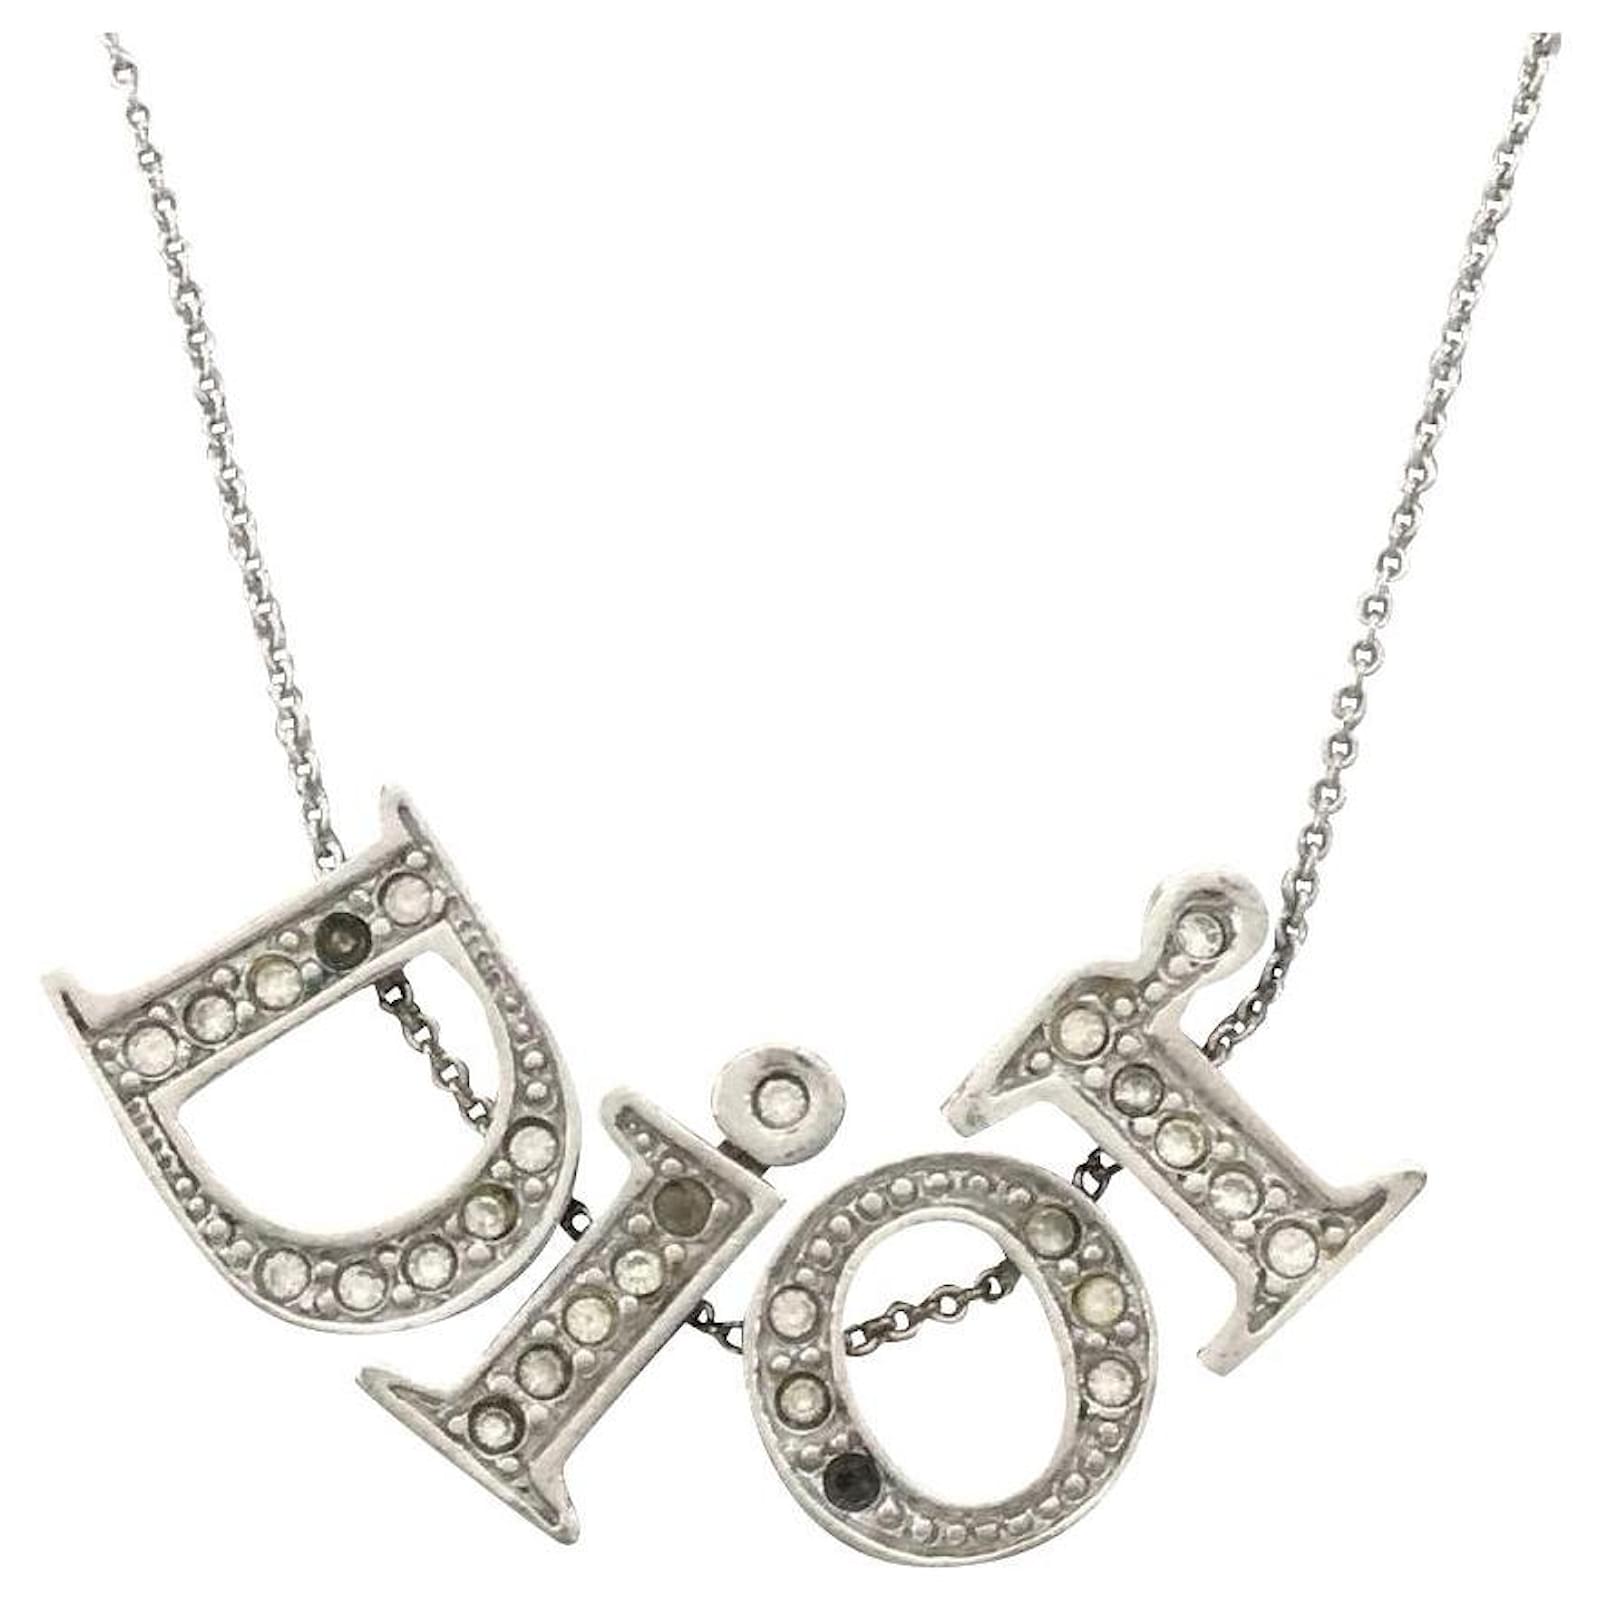 Buy Uniqon JAR0132 Trending Valentine's Day Special Metal Stainless Steel  Dior Name Letter Romantic Love Couple Locket Pendant Necklace With Chain  For Women's And Girl's Gift Set at Amazon.in